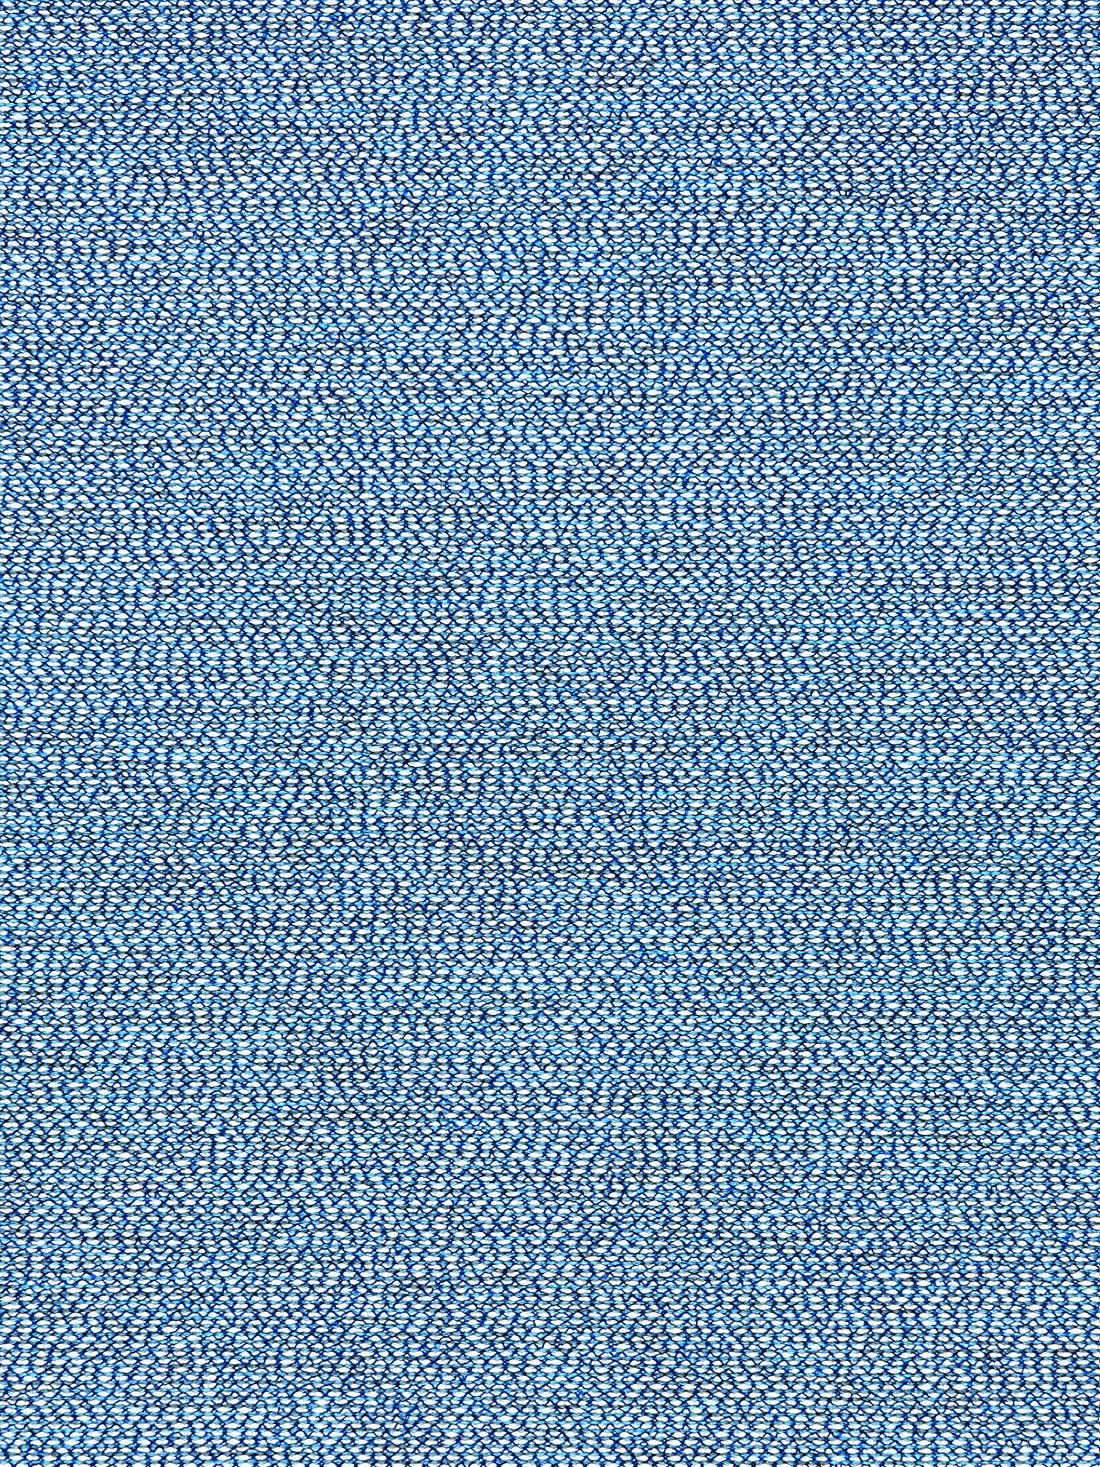 Arena Beach fabric in blue water color - pattern number EA 00016003 - by Scalamandre in the Old World Weavers collection